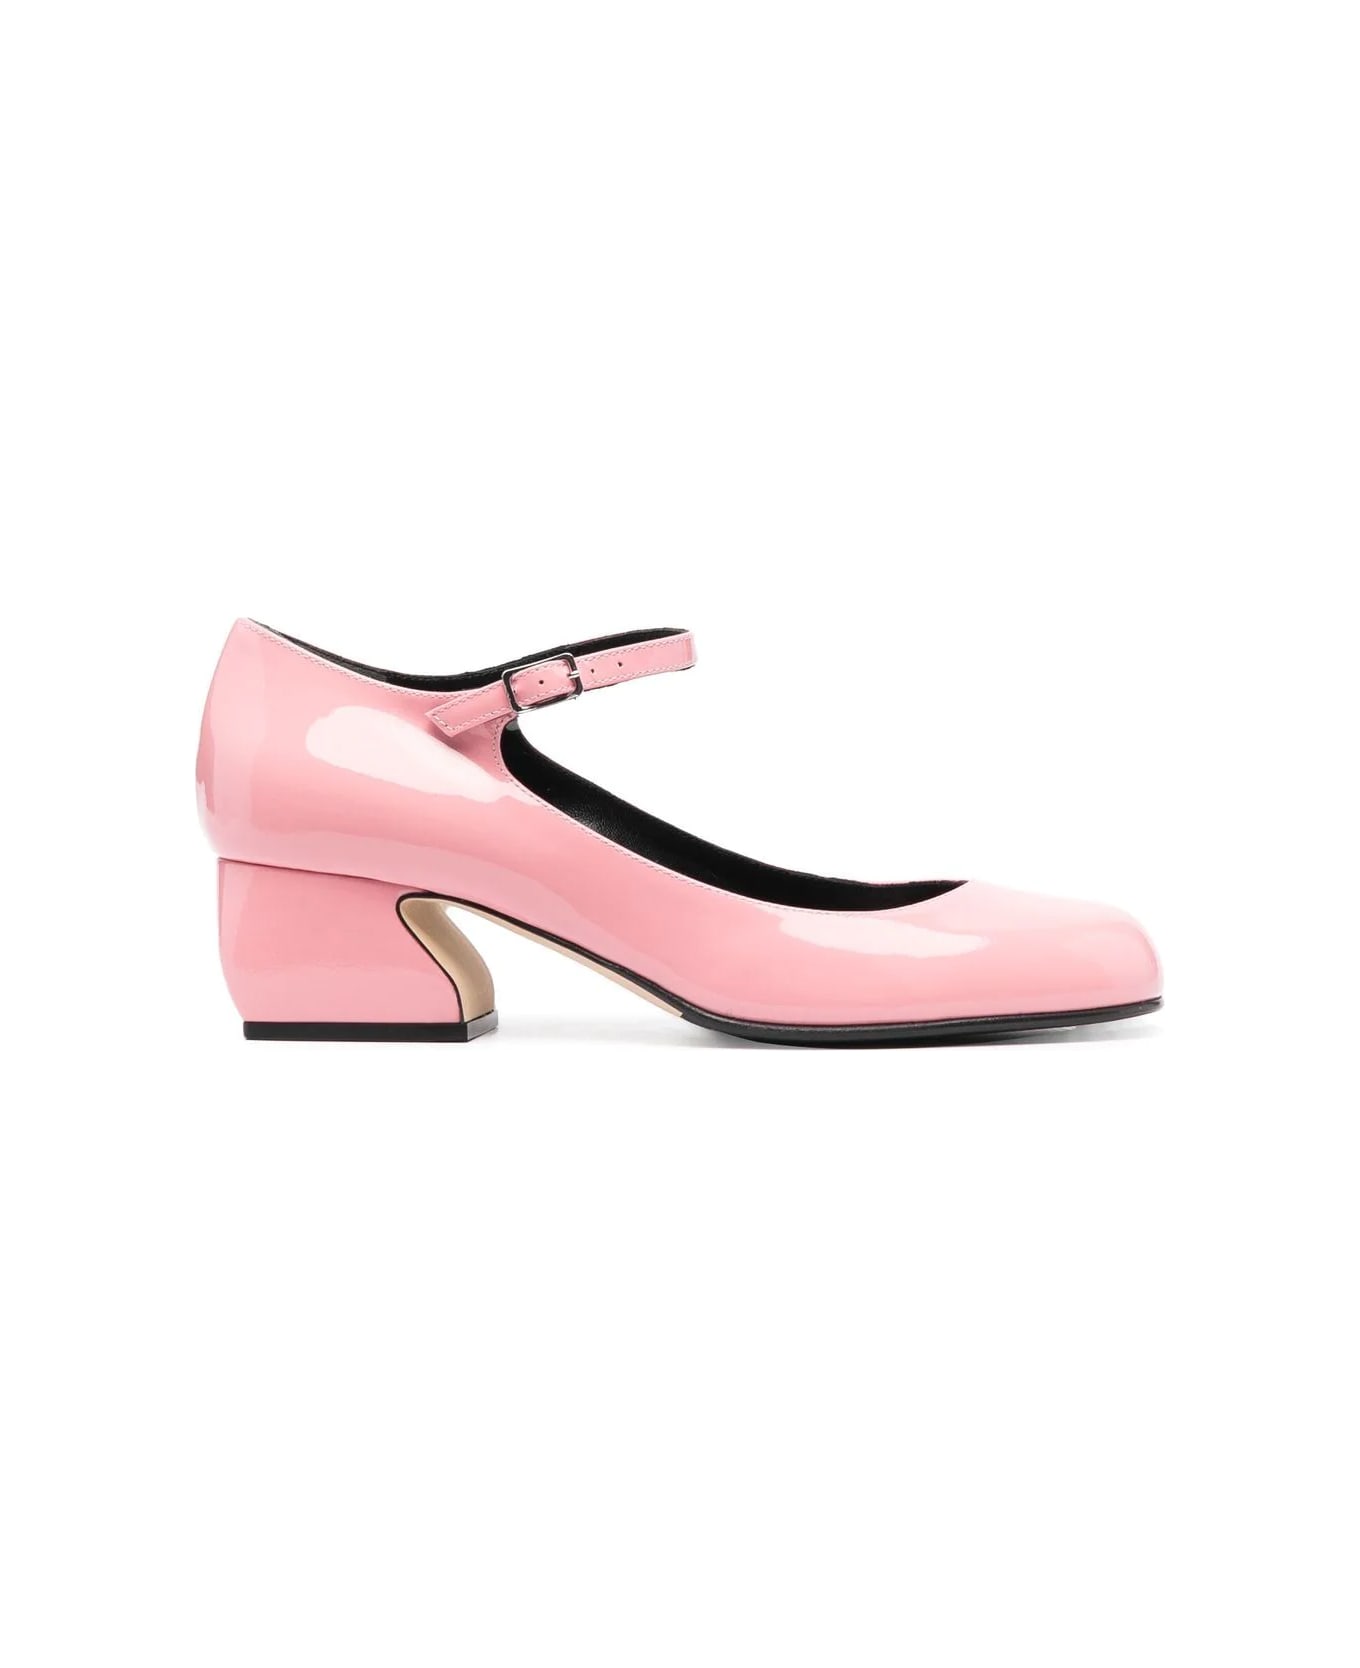 SI Rossi Pump 45 - Alizee Pink ハイヒール